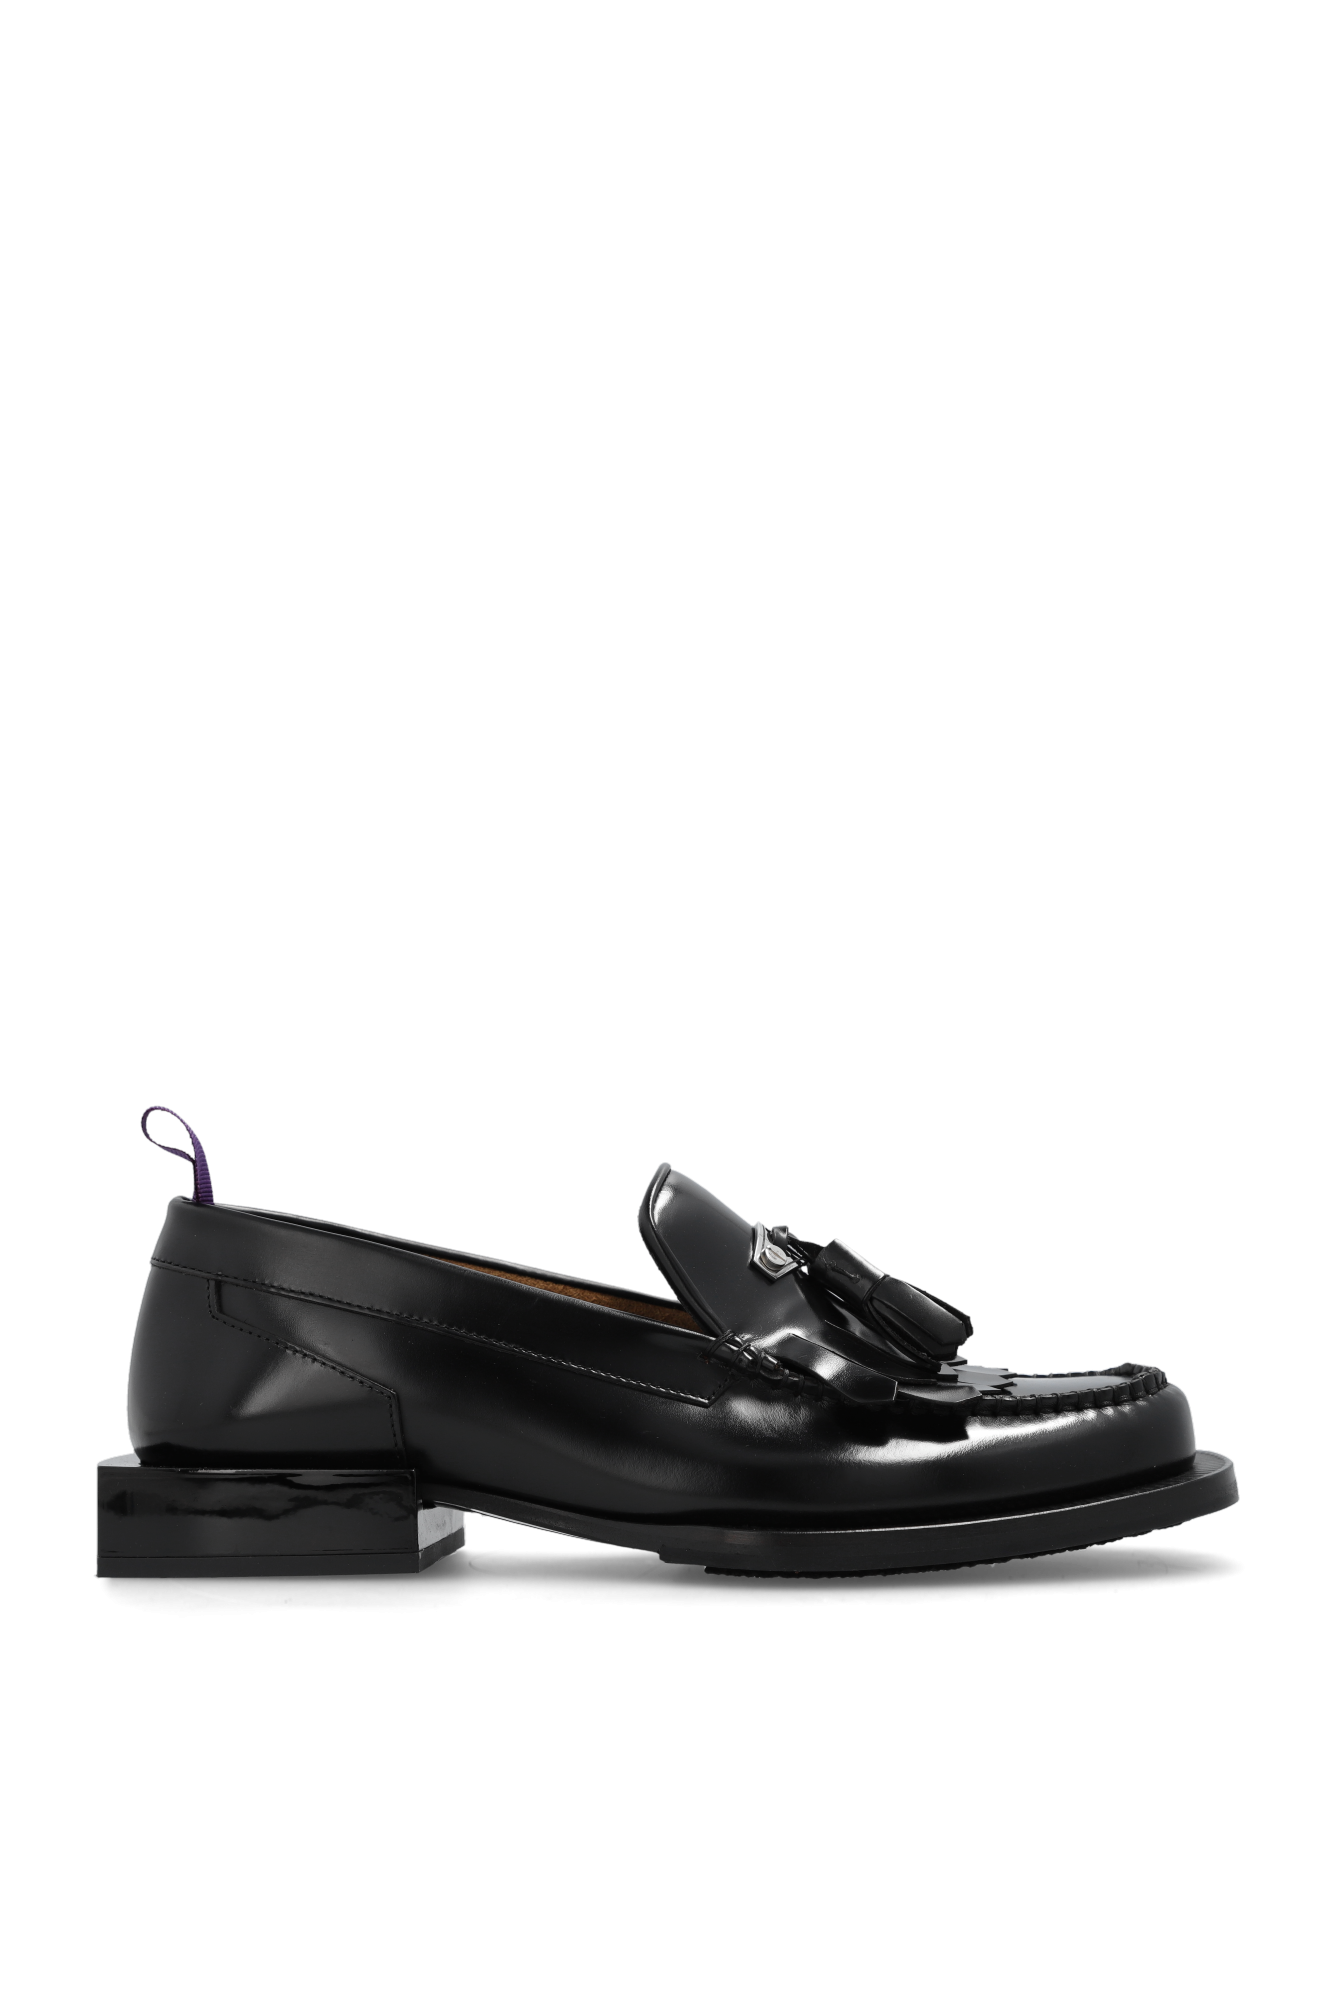 Women's Shoes | Eytys 'Rio' leather loafers | Tyrex 5.0 Sneaker ...